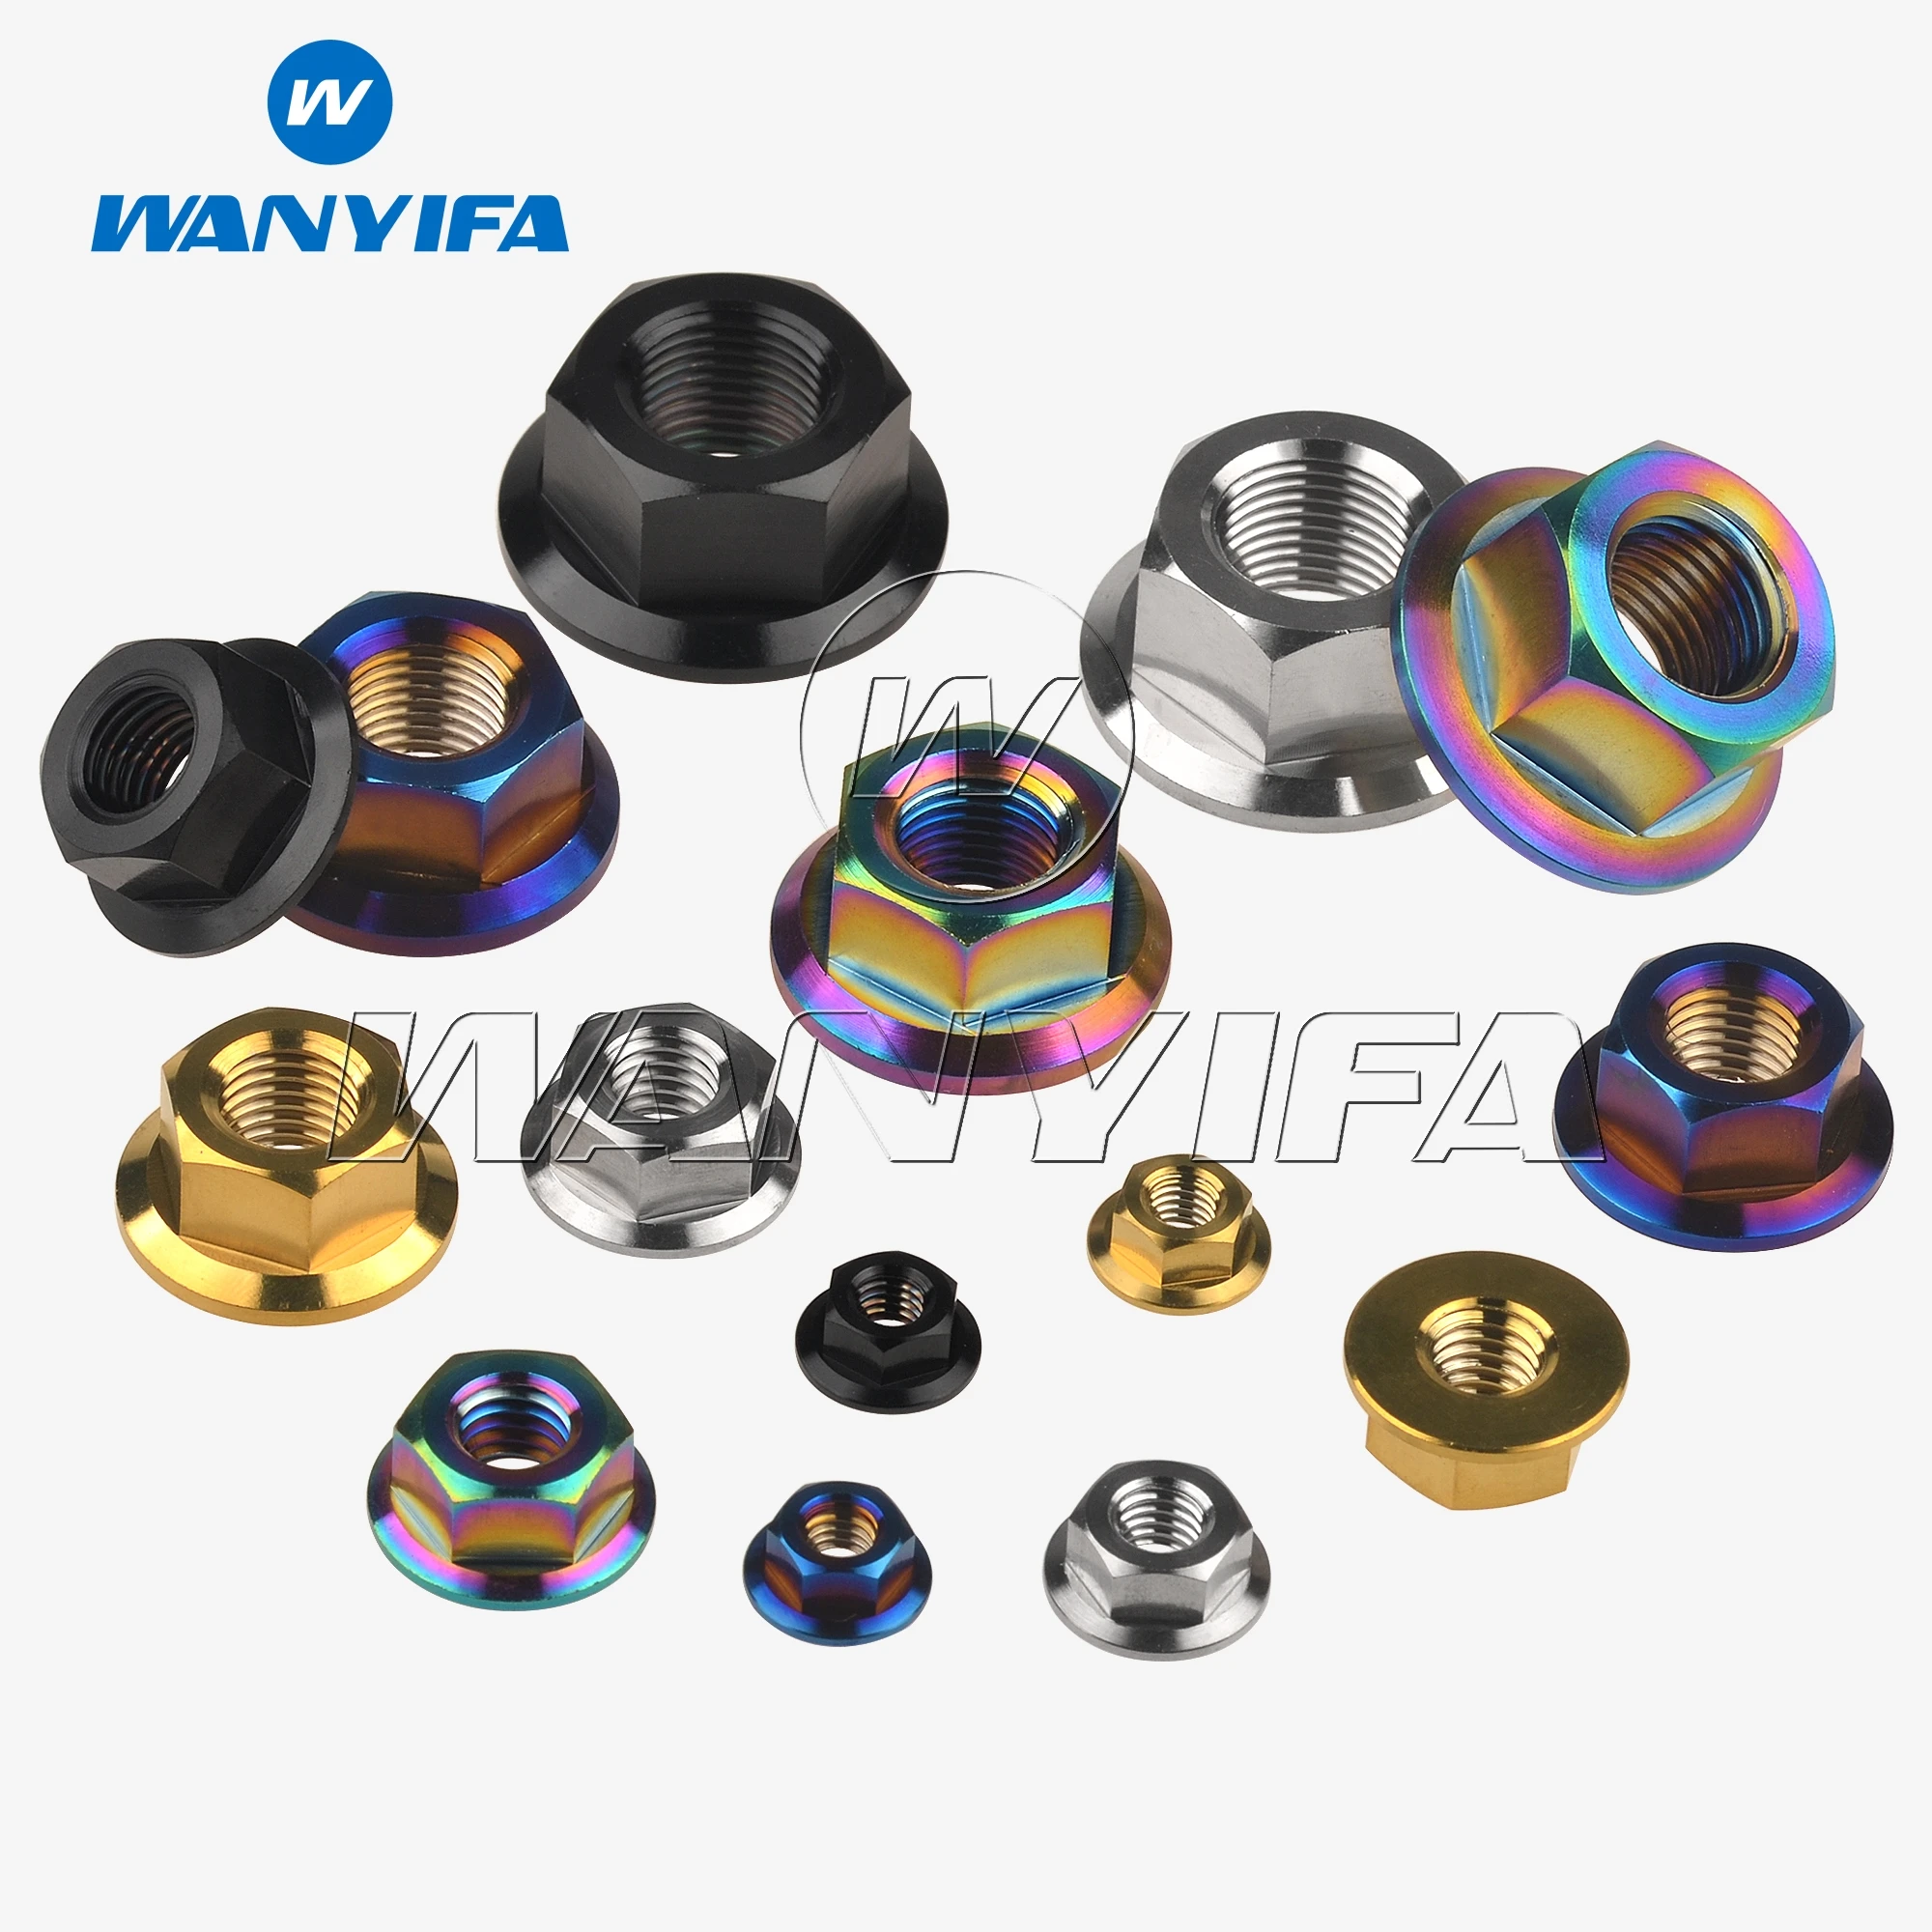 M10 Pitch 1.25mm, Rainbow Wanyifa Titanium M6 M8 M10 M12 M14 Flange Bolt Nut Bicycle Motorcycle Rear Axle Car Modification Accessories Pack of 6 